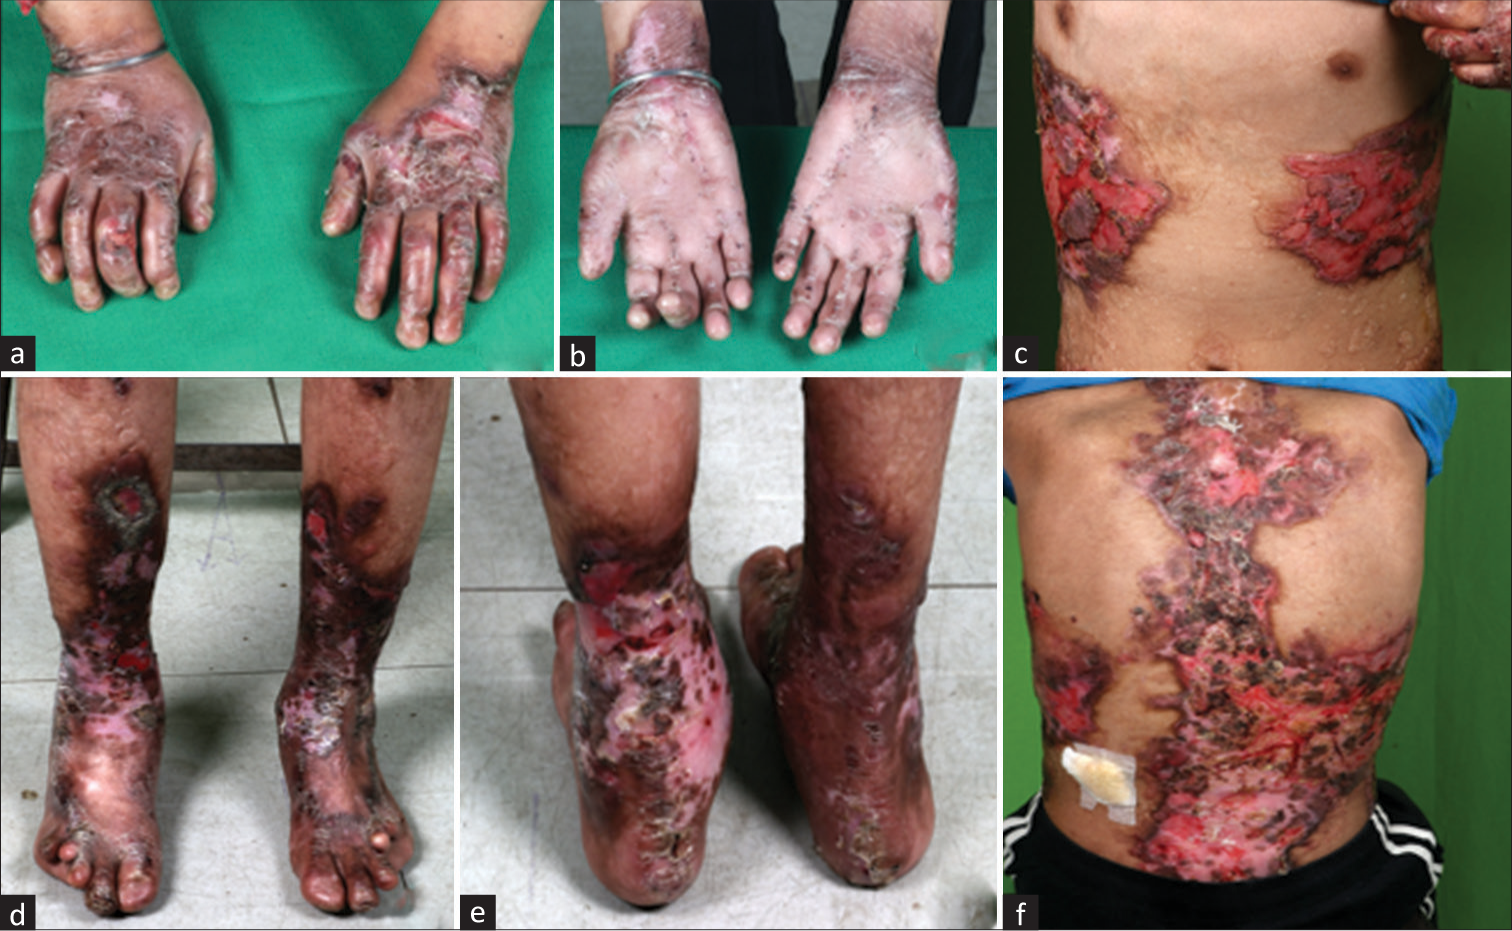 (a–f) Patient with severe generalized recessive dystrophic epidermolysis bullosa. (a and b) Erosions and scarring of the skin of palms and dorsa of both the hands with contracture of hands, pseudoainhum of distal phalanges, and anonychia. (c and f) Extensive areas of erosions and figurate scarring over the trunk. Note the discrete atrophic albopapuloid macules and papules over the back with a wrinkled surface. (d and e) Nonhealing ulcers over the legs with areas of depigmentation and scarring accompanying nail loss and deformity of toes.